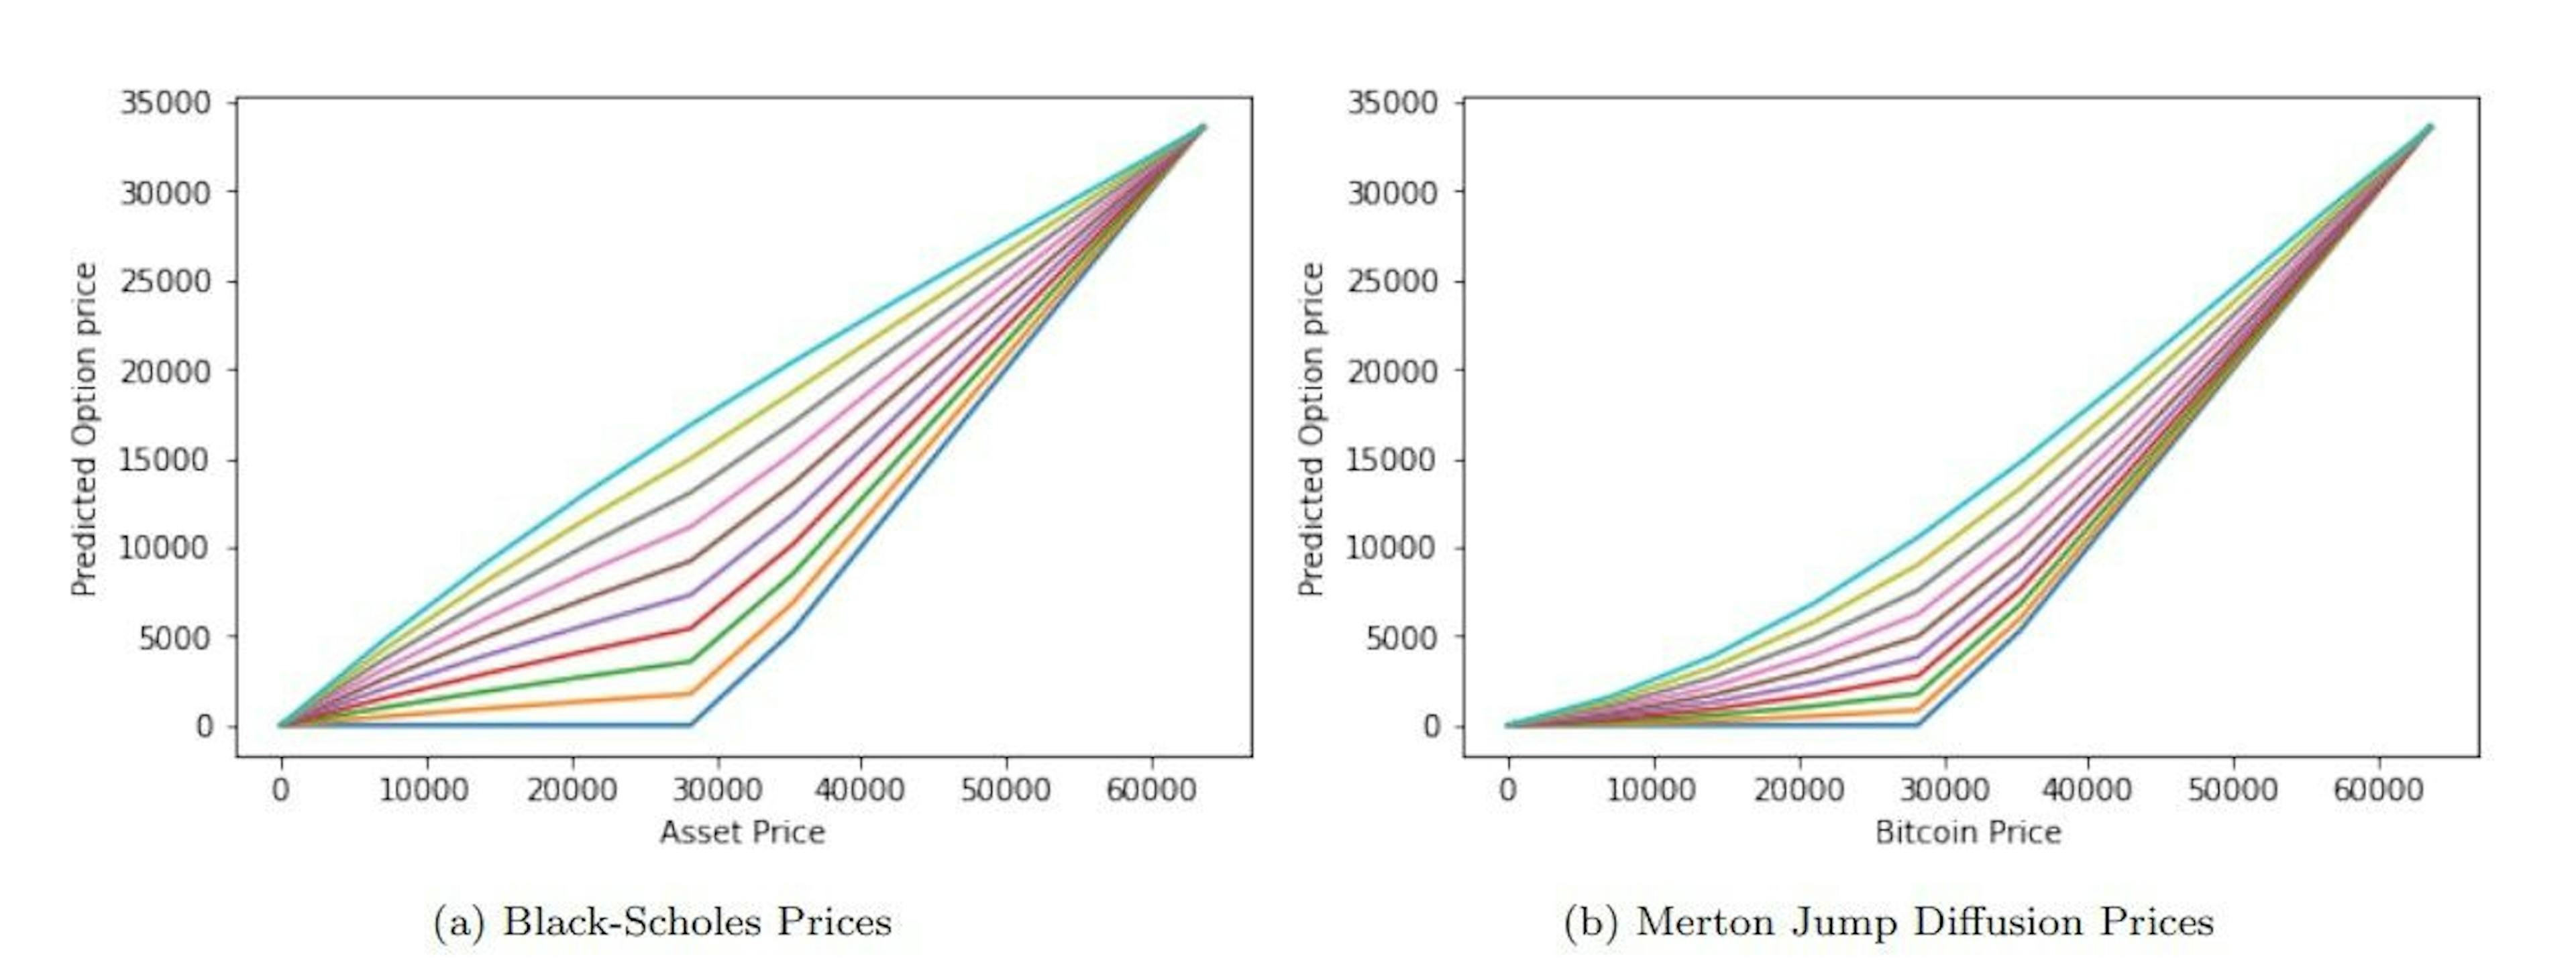 Figure 5: Model I - Option price plots for Black-Scholes and Merton jump-diffusion models